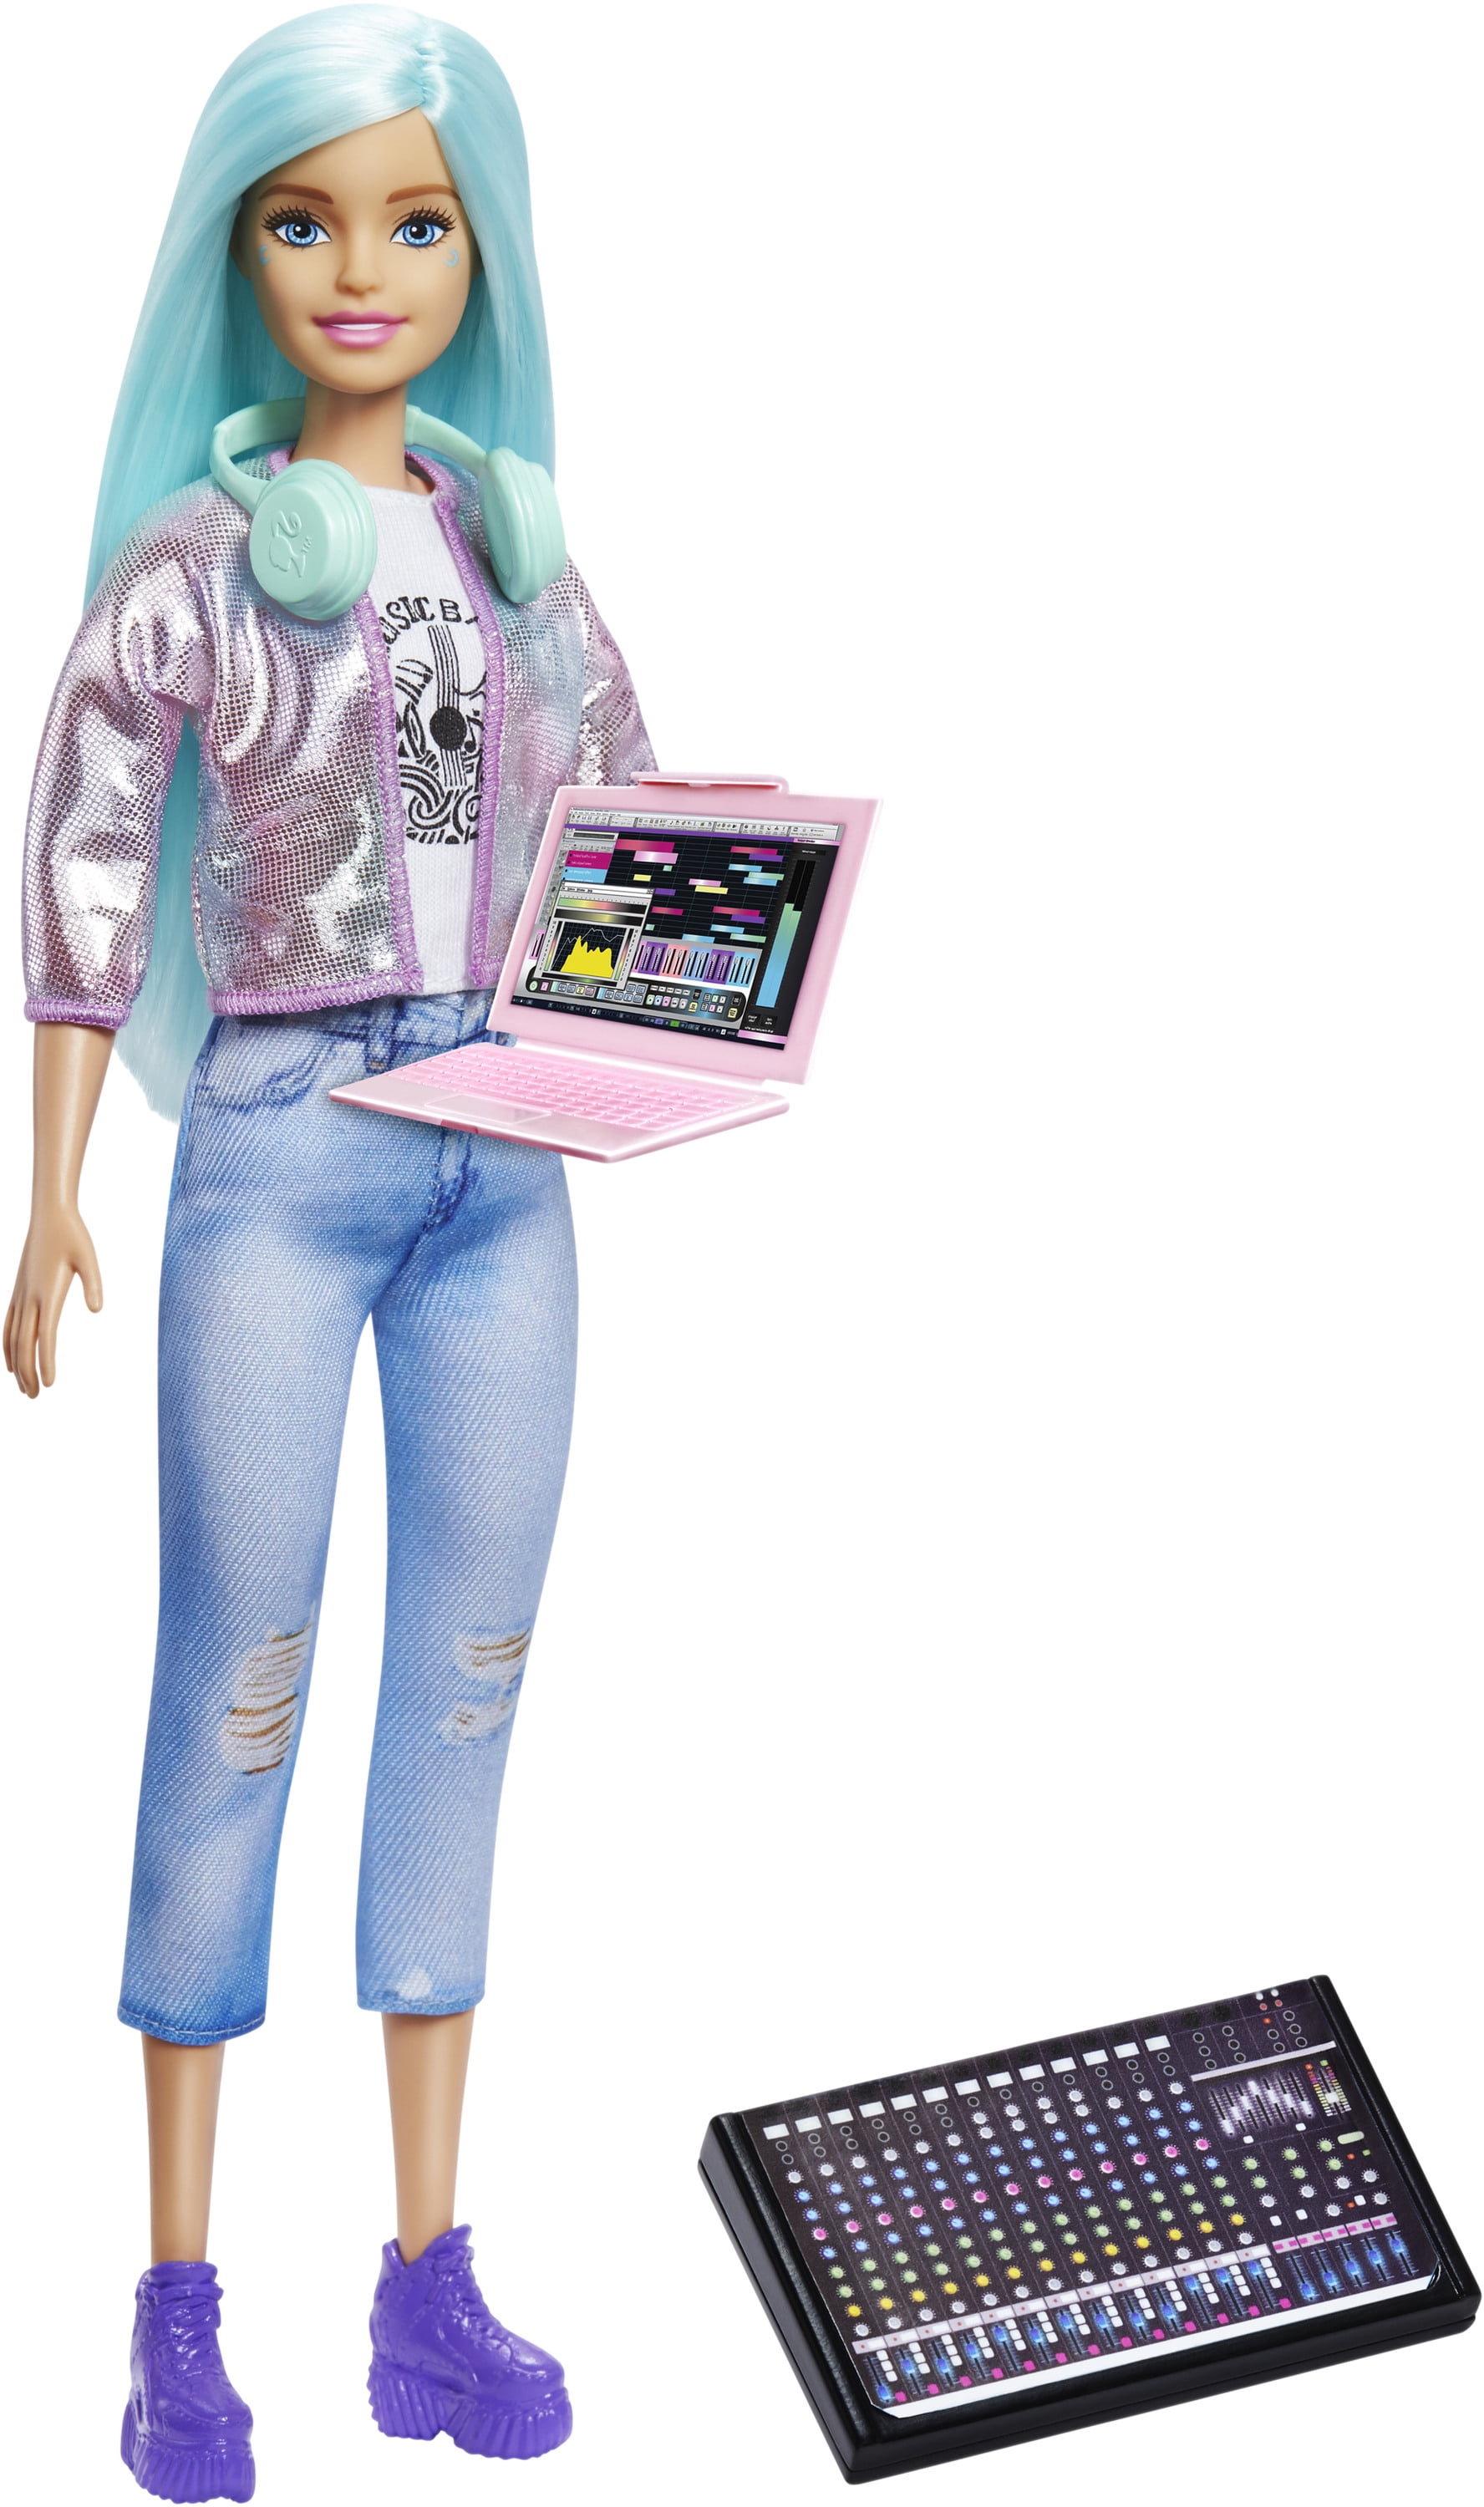 Details about   New Barbie Fashion Career Musician Singer Denim Outfit with Guitar Accessory 